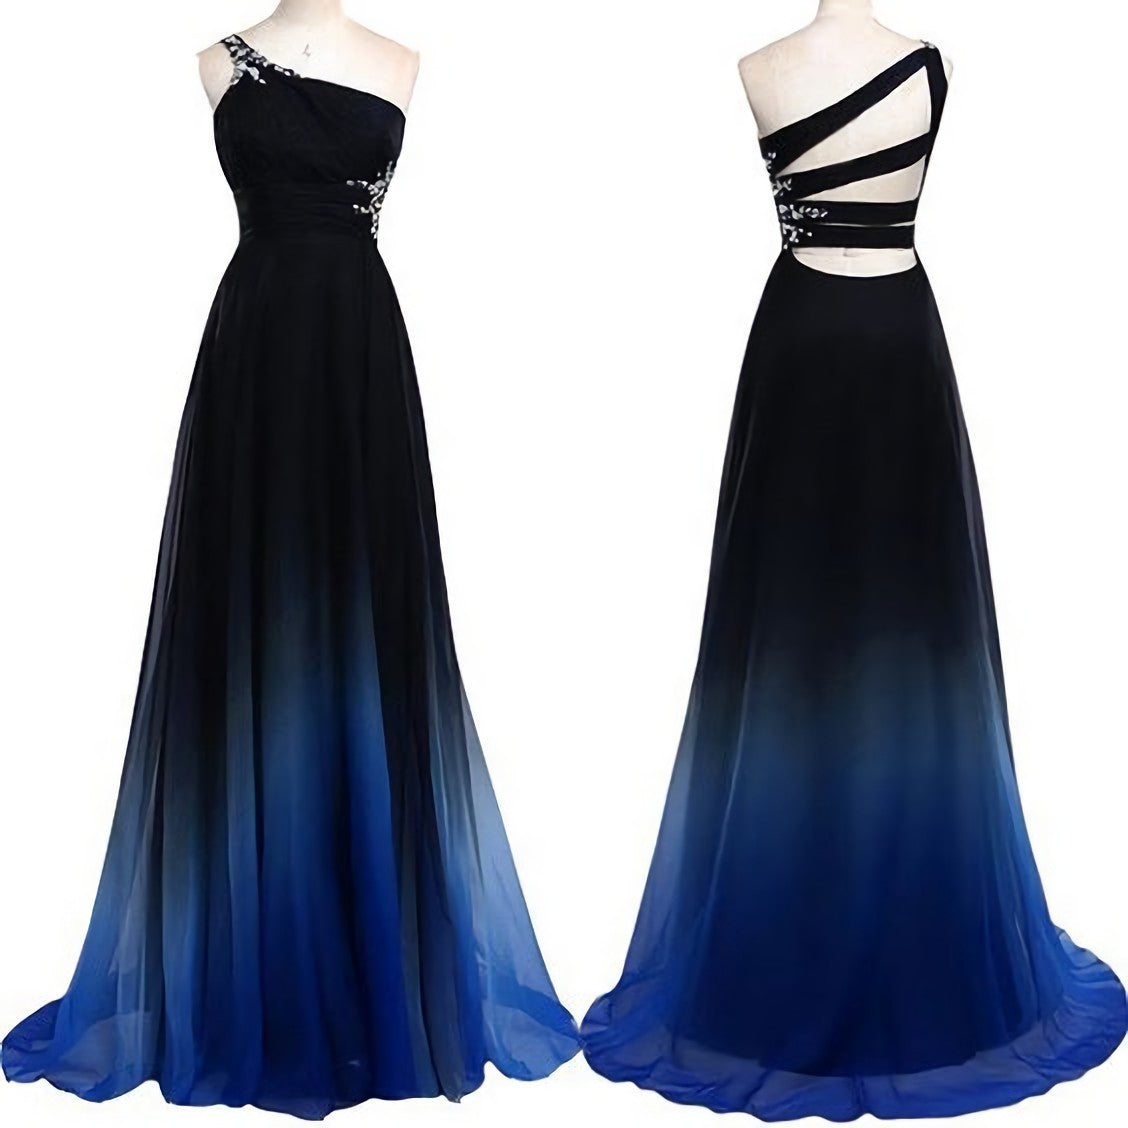 Wedding Dress Top, One Shoulder Navy Blue Royal Blue Ombre Gradient Color Chiffon Long Ombre For Sweet 16 Prom Dresses